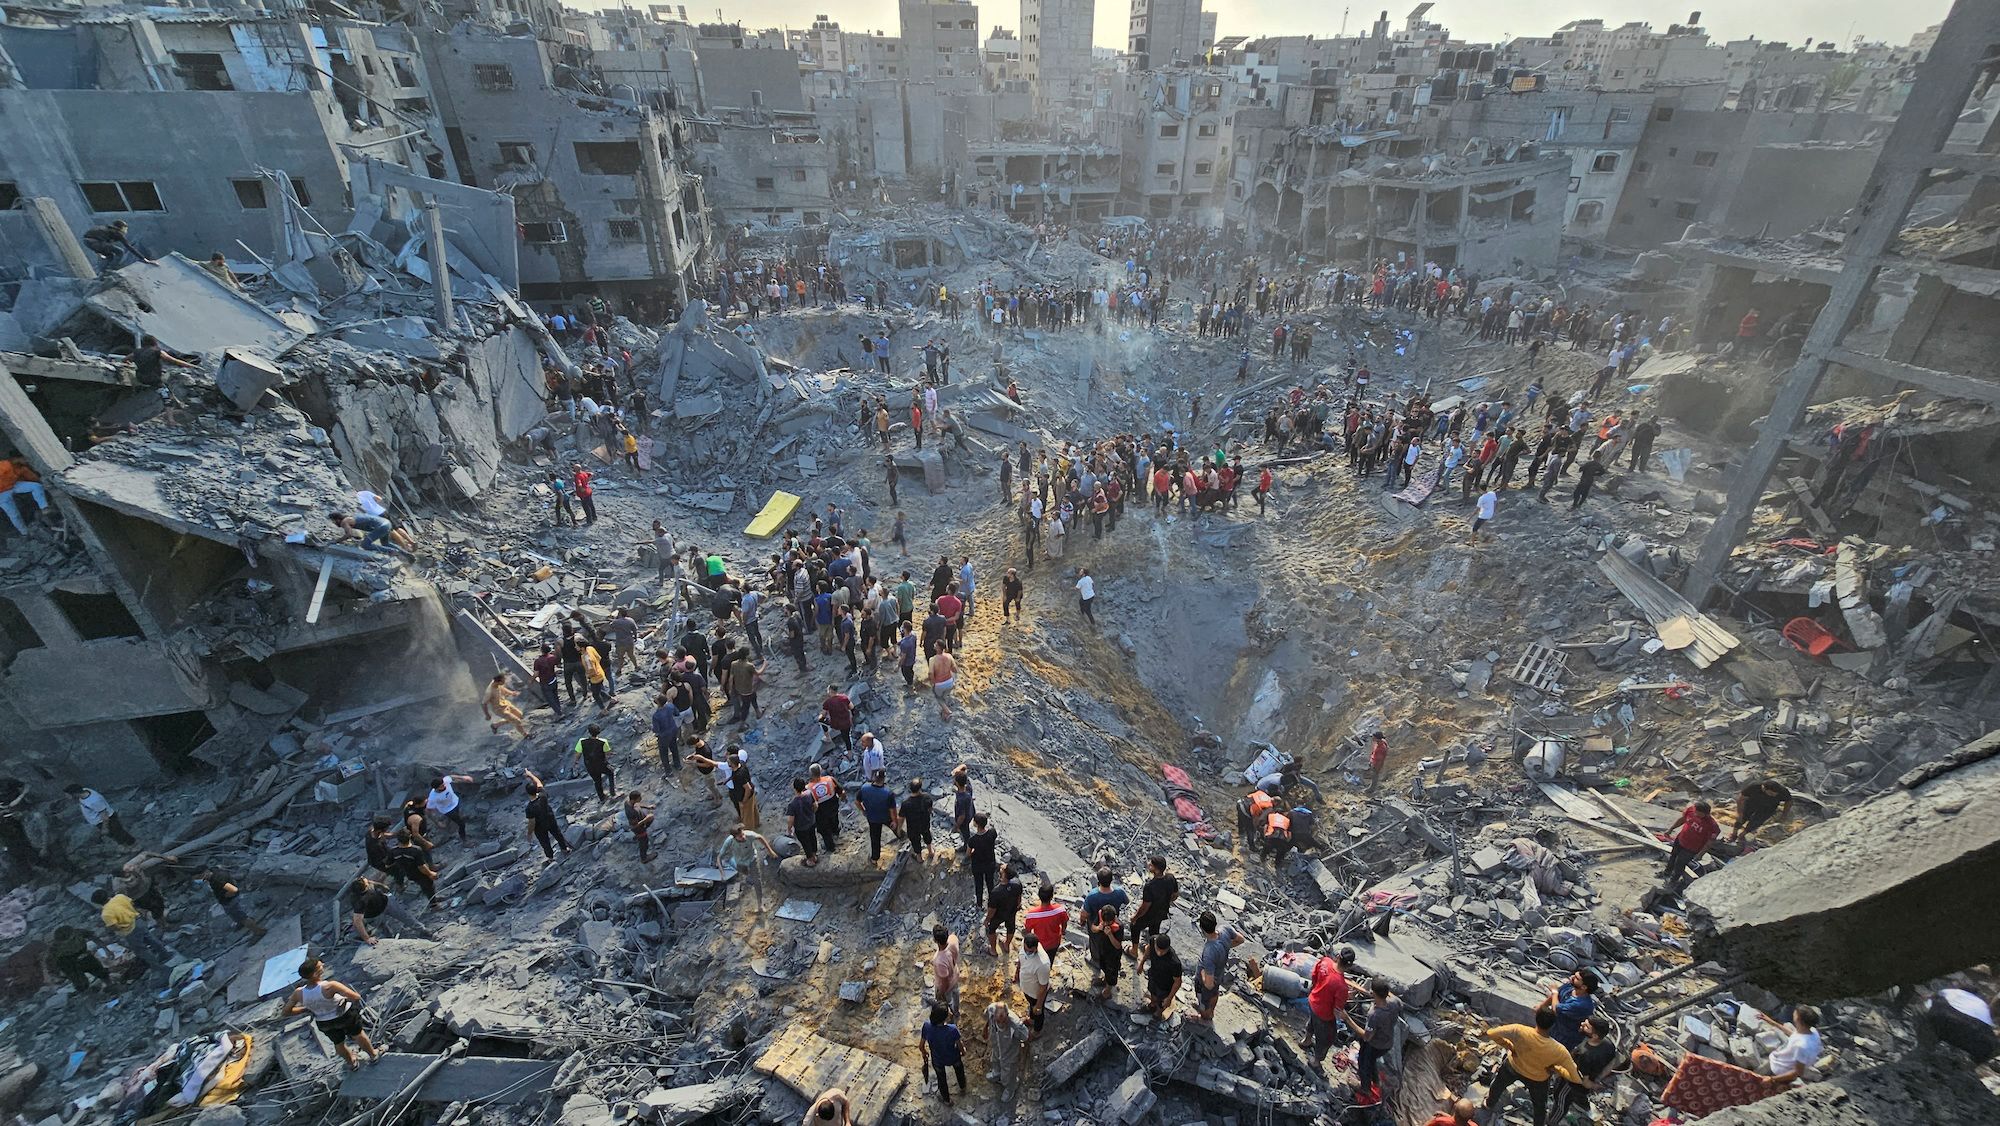 The aftermath of the Israeli strike at the Jabalya refugee camp in Gaza on Tuesday.
(Anas al-Sharee...